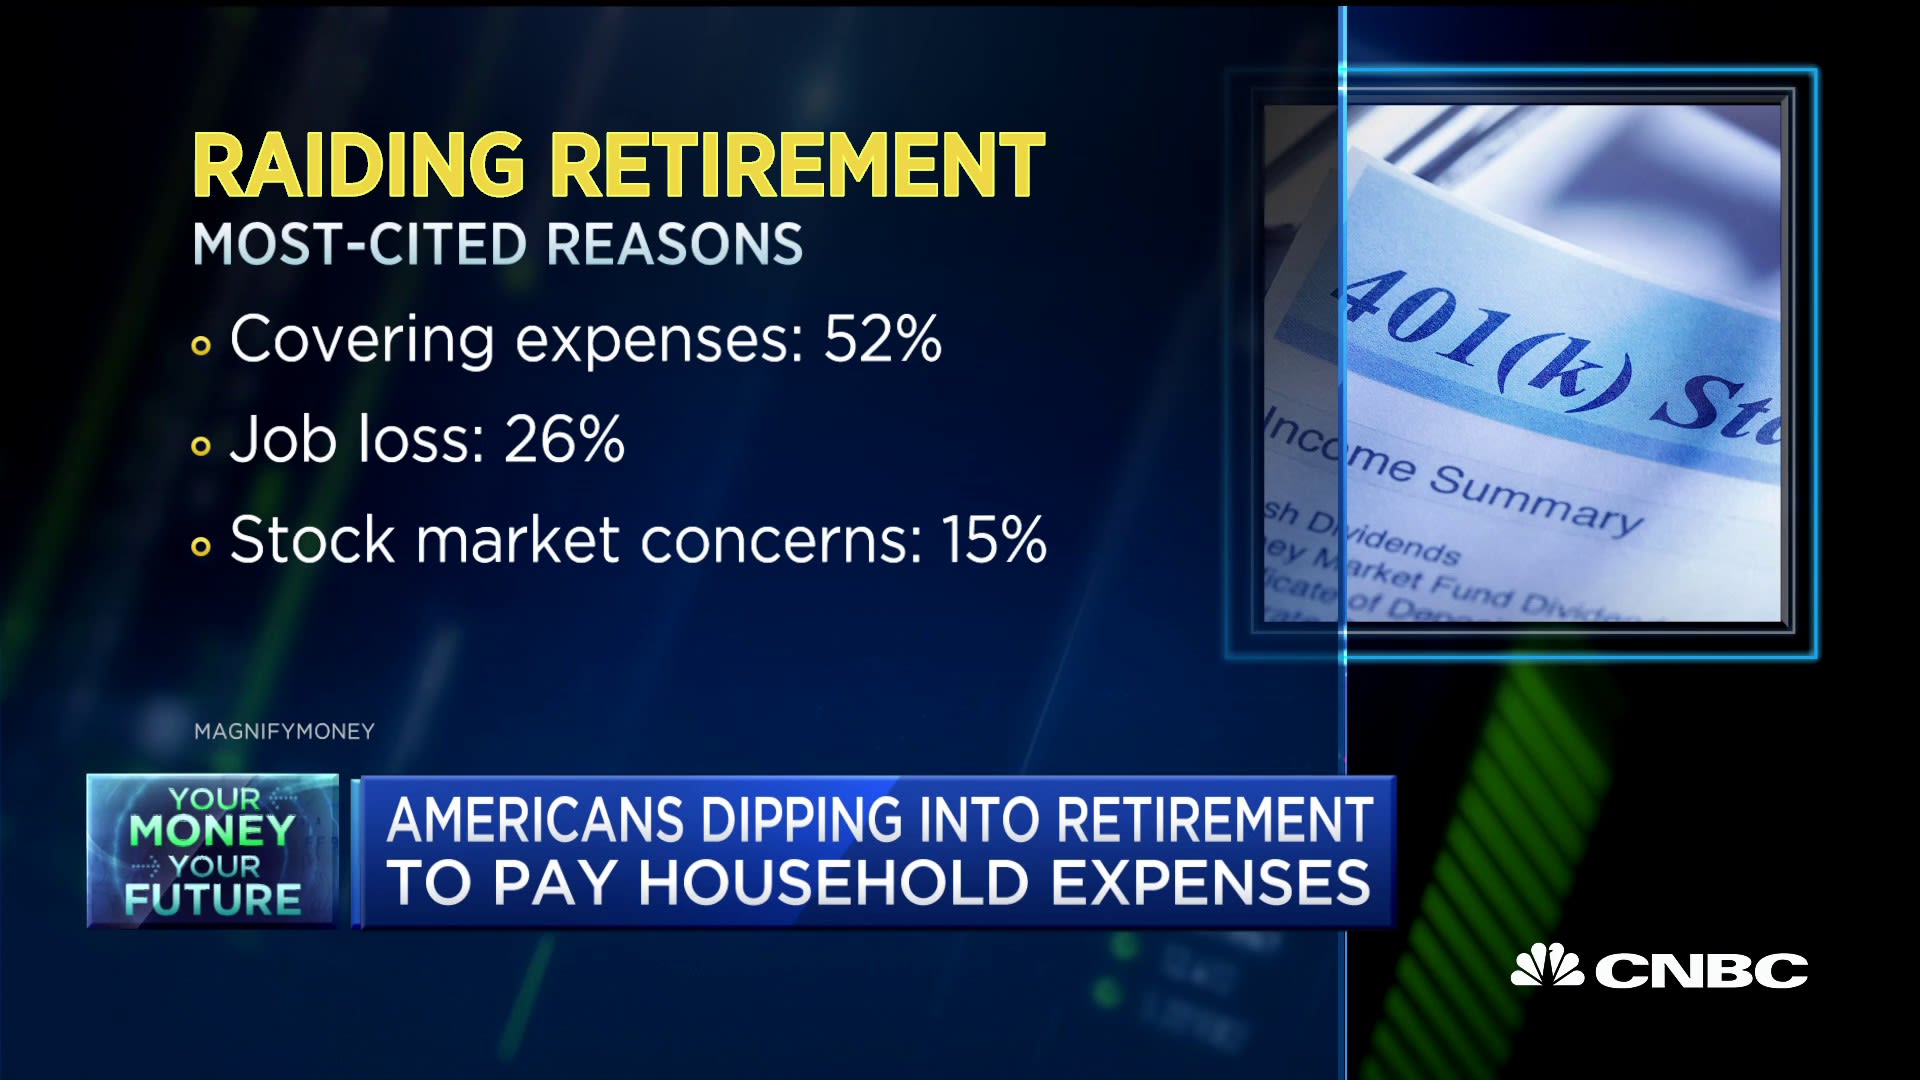 Laid off workers raiding their retirement funds